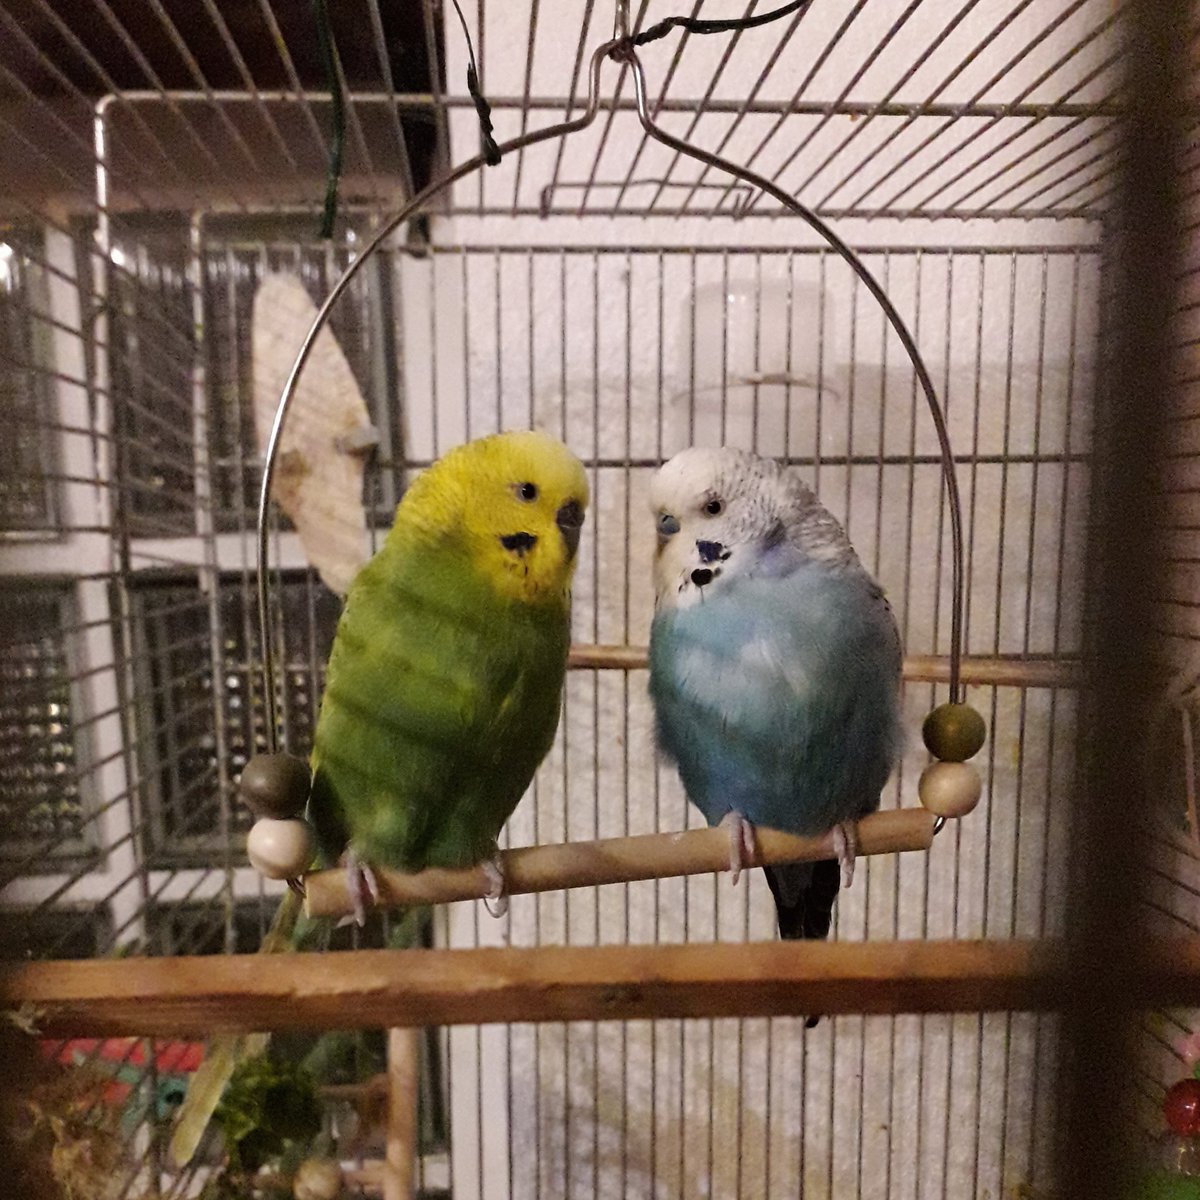 11. One of my cat bought a budgie home once. Alive. We kept it and bought another budgie so the first one wouldn't be lonely. That was more than a year ago and they still chirp happily together.